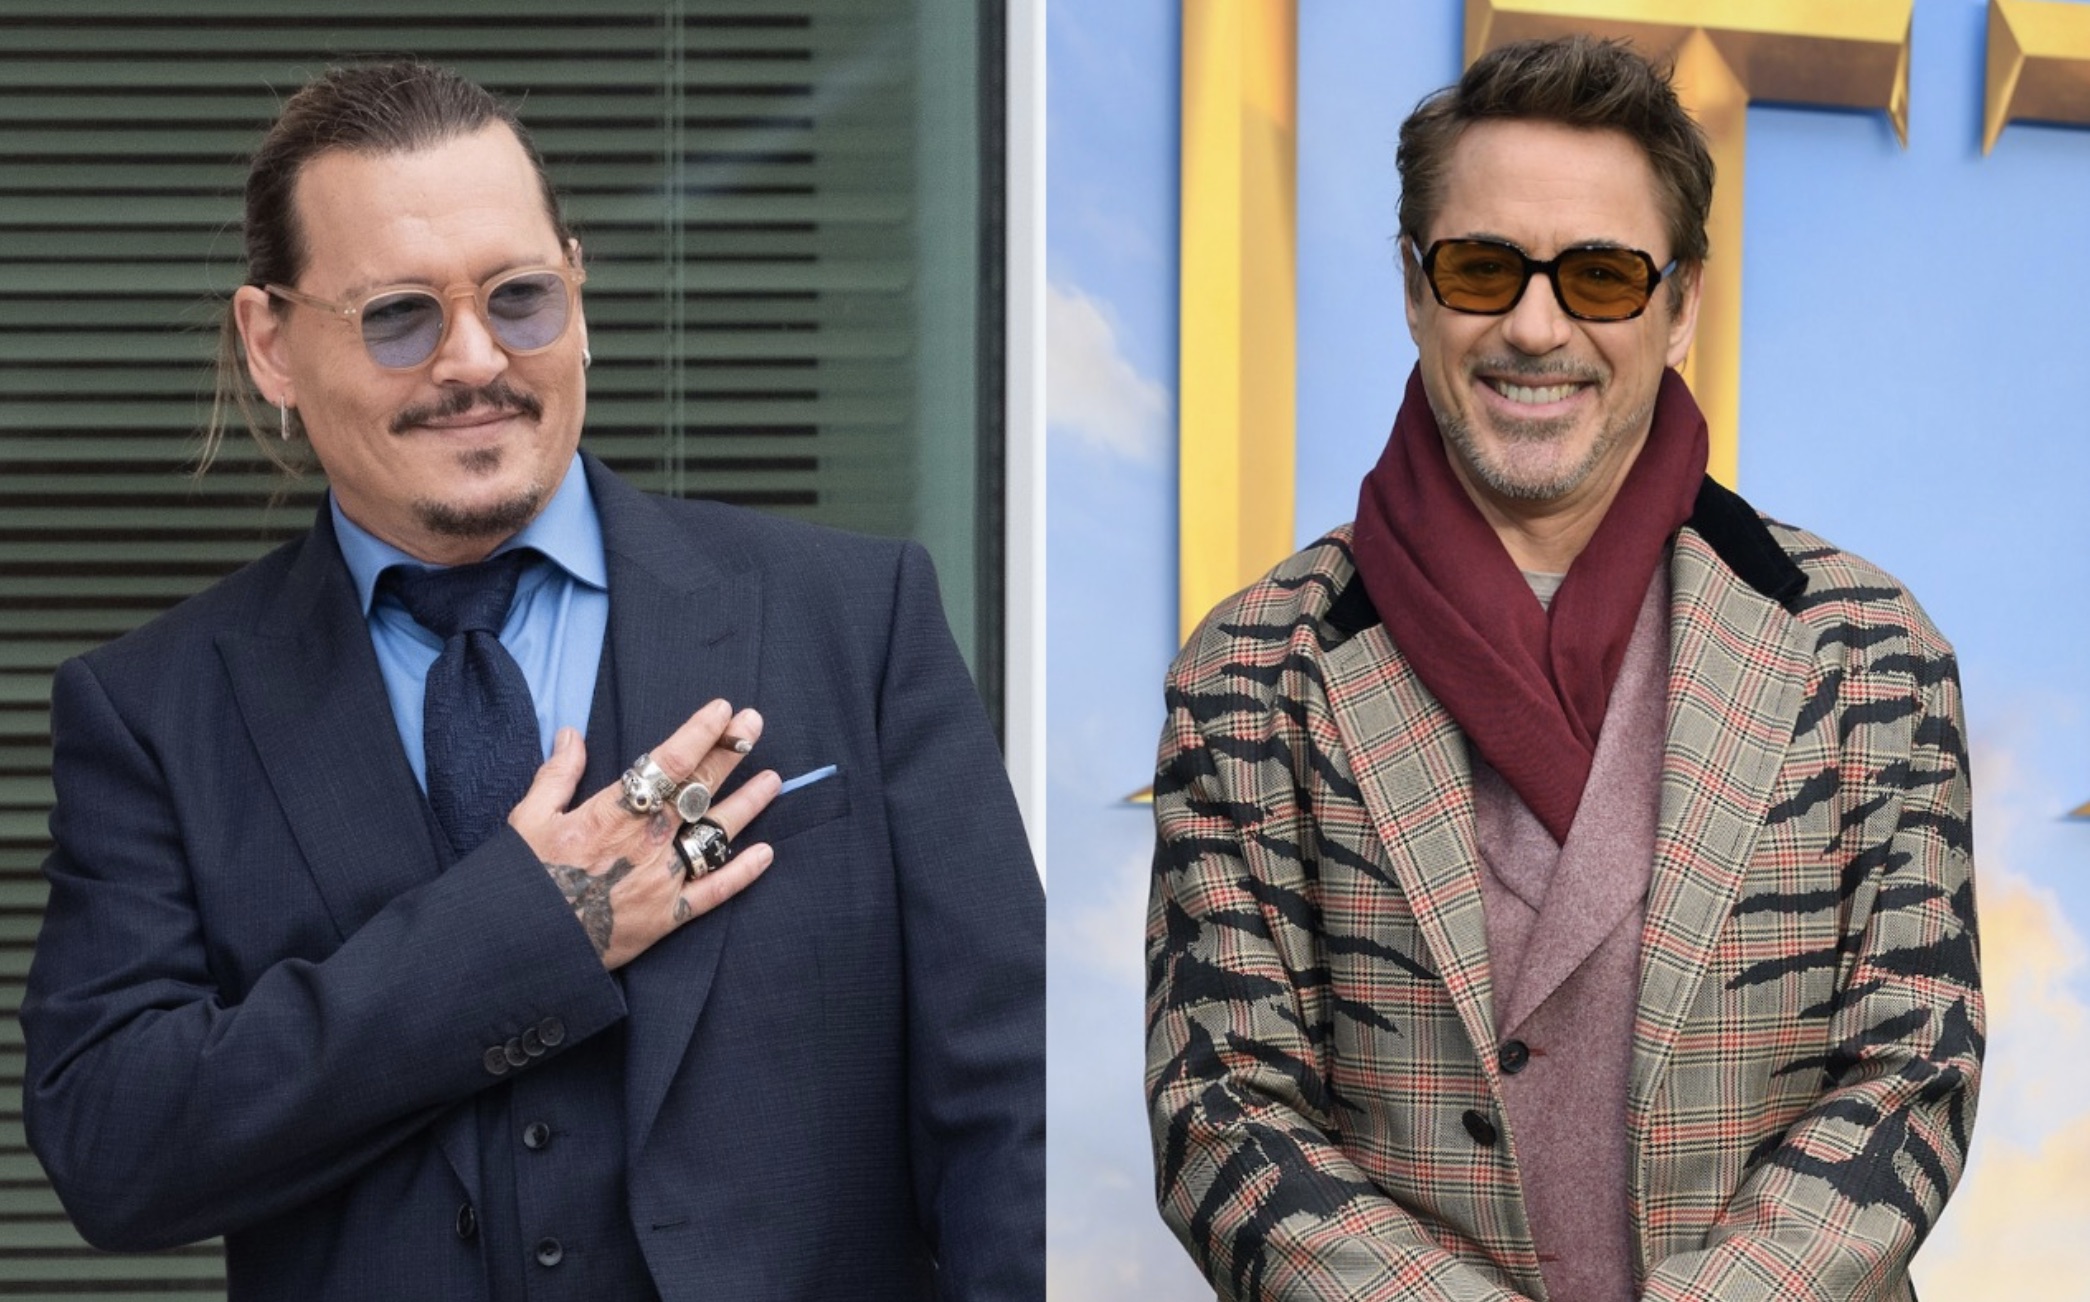 Johnny Depp celebrated trial verdict with Robert Downey Jr. on FaceTime